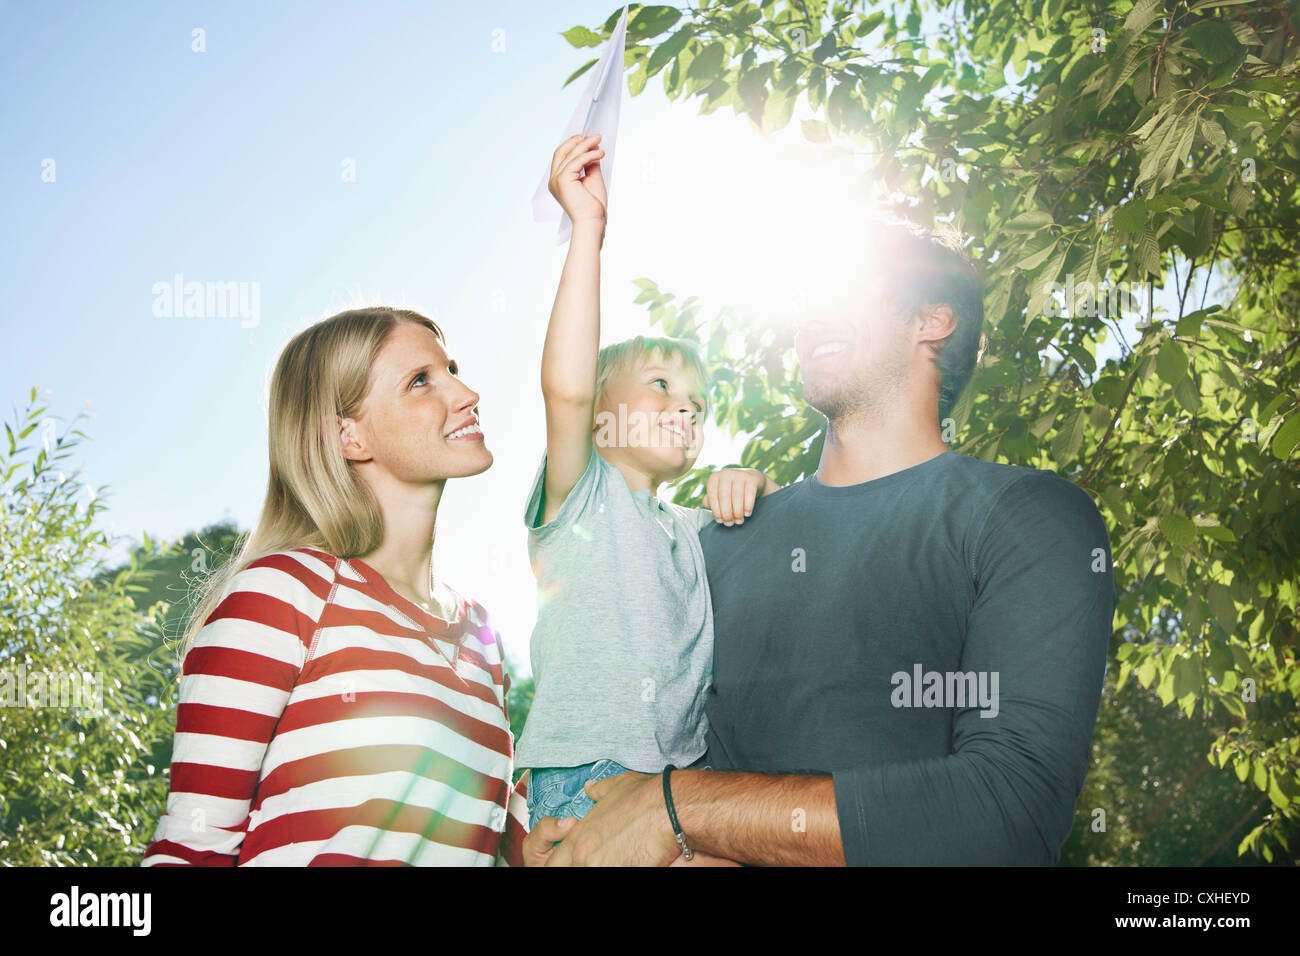 Germany, Cologne, Family playing with paper plane, smiling Stock Photo